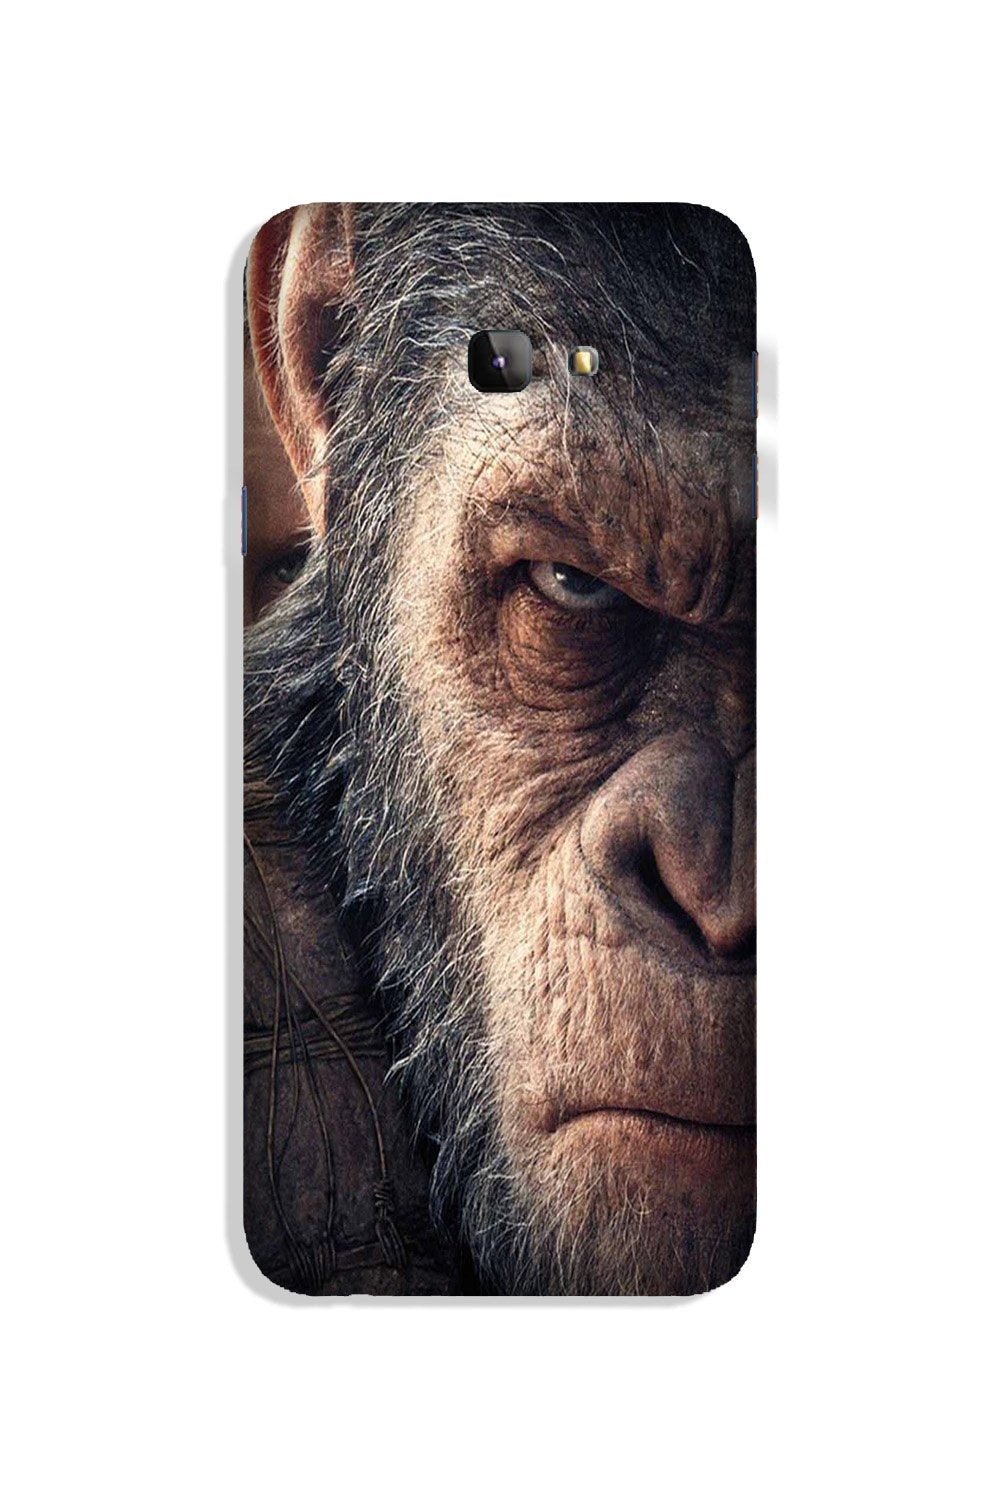 Angry Ape Mobile Back Case for Galaxy J4 Plus (Design - 316)